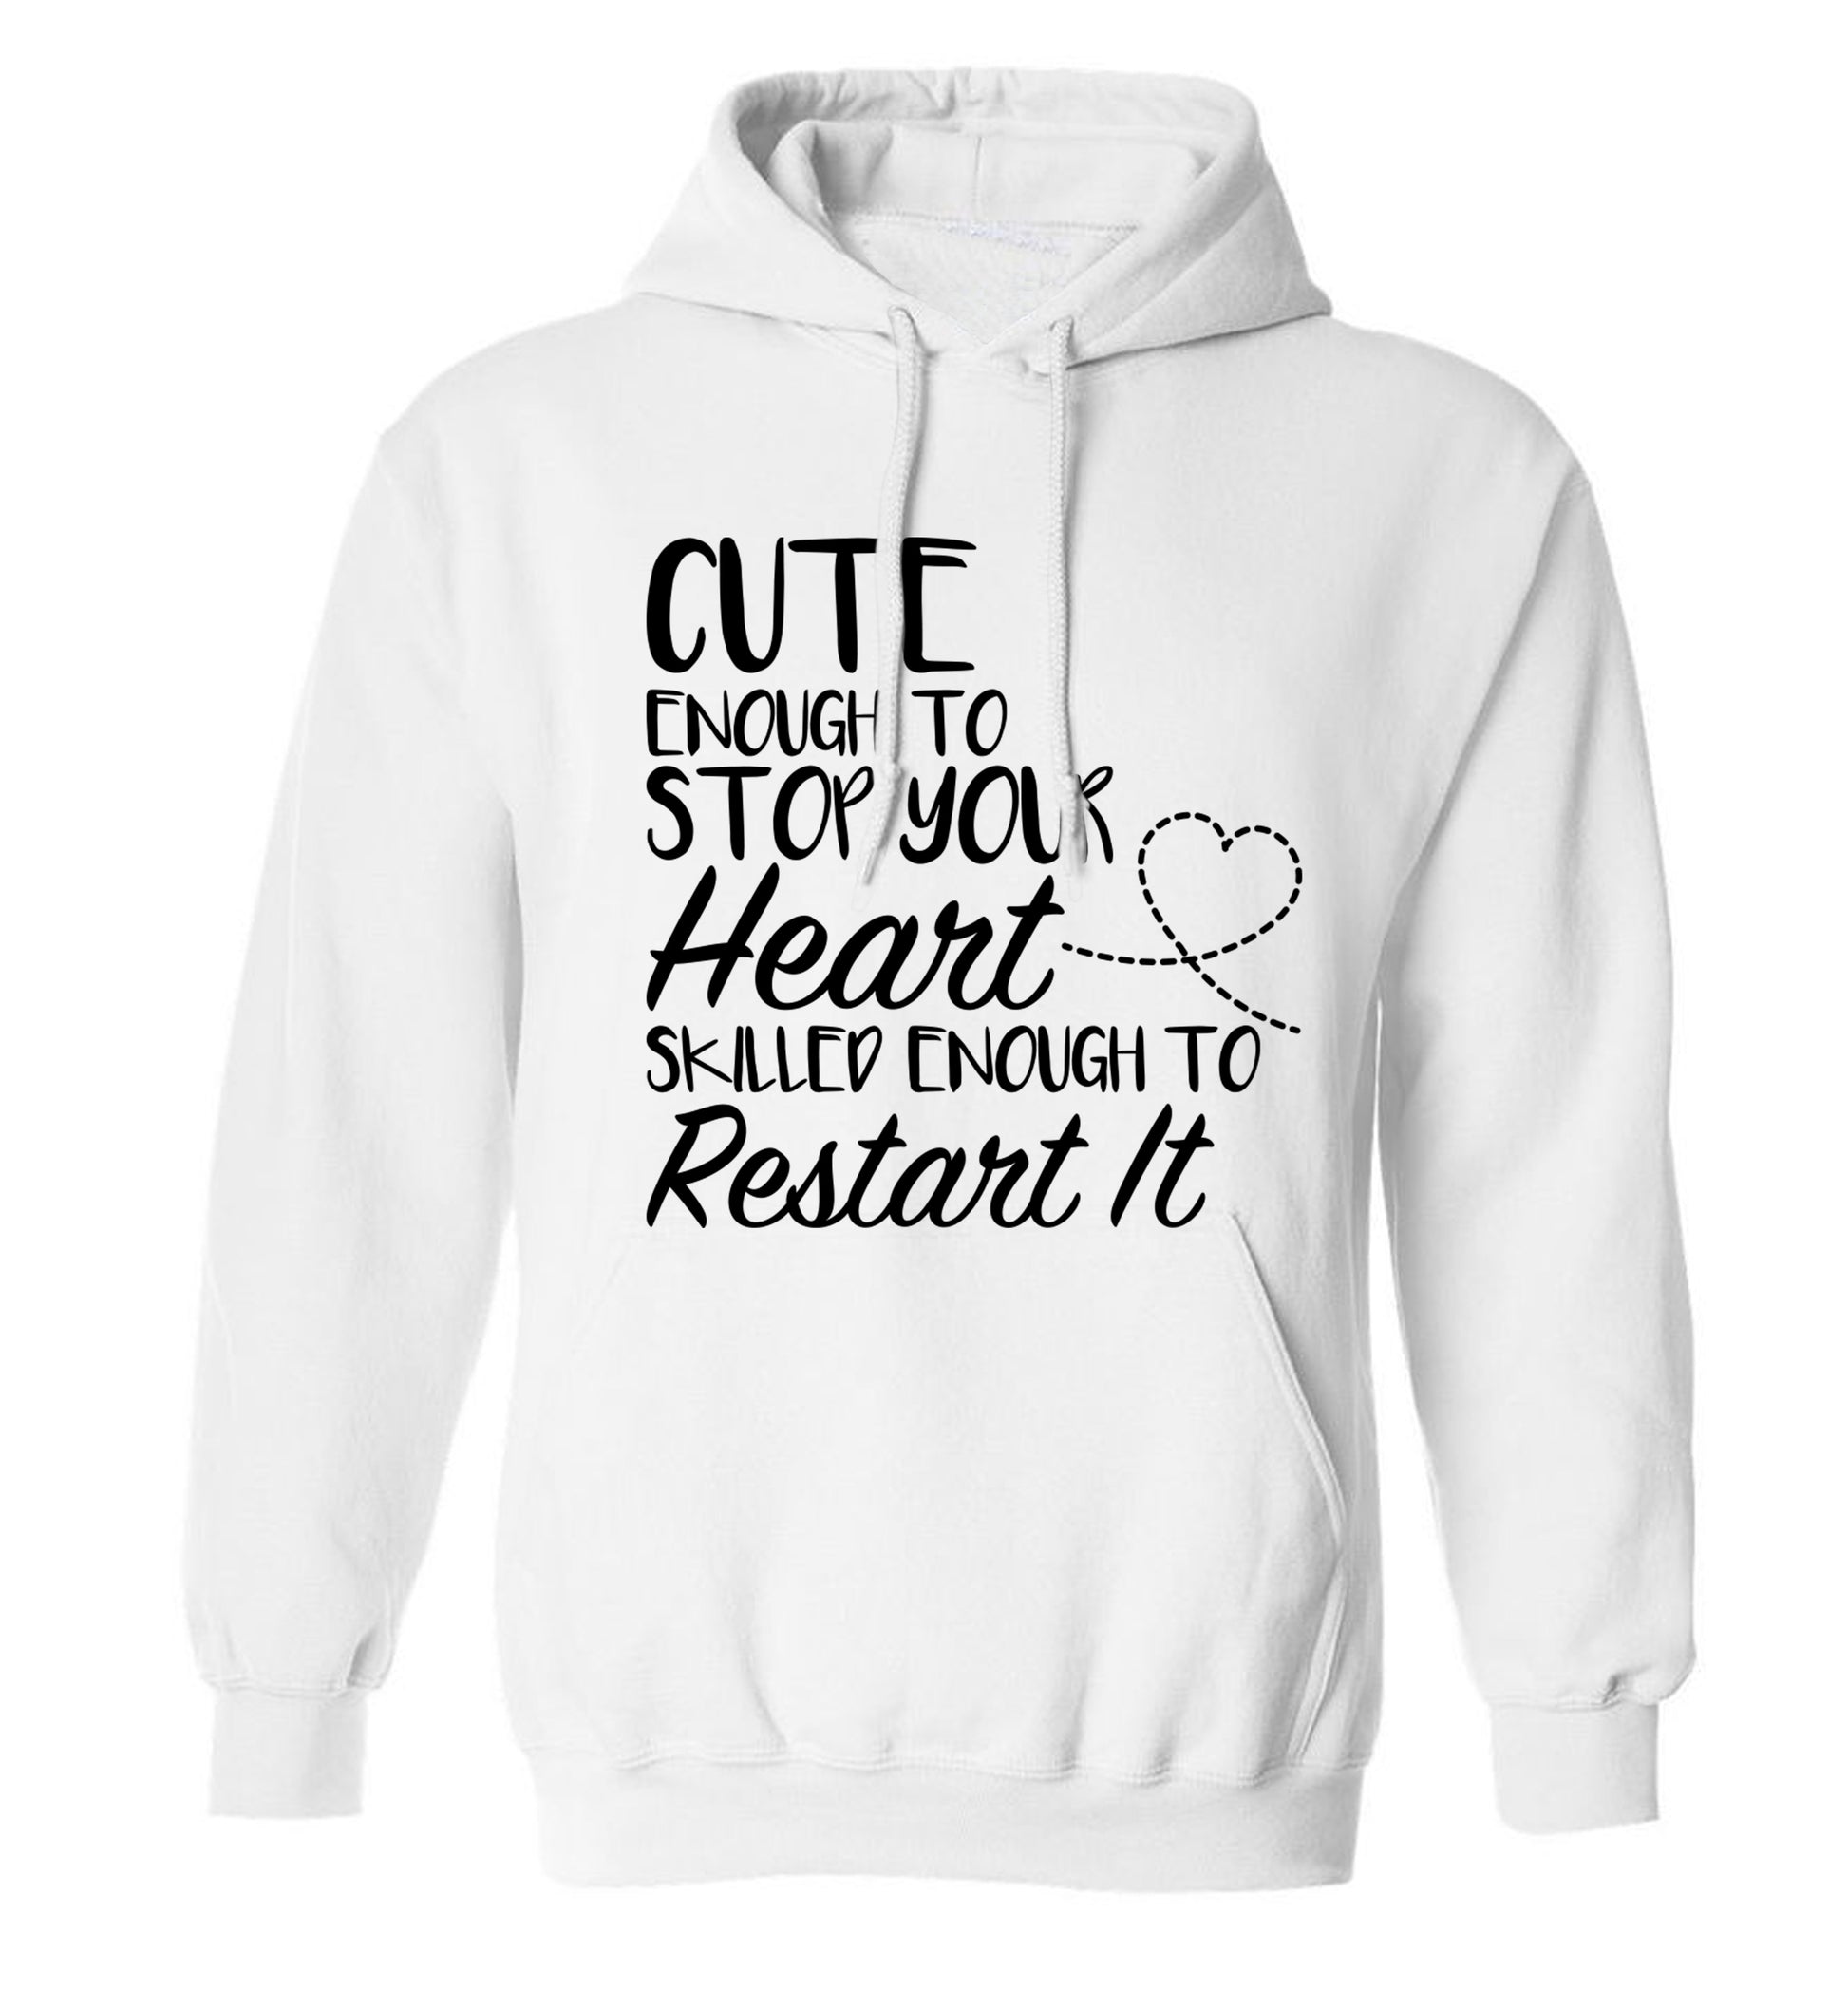 Cute enough to stop your heart skilled enough to restart it adults unisex white hoodie 2XL